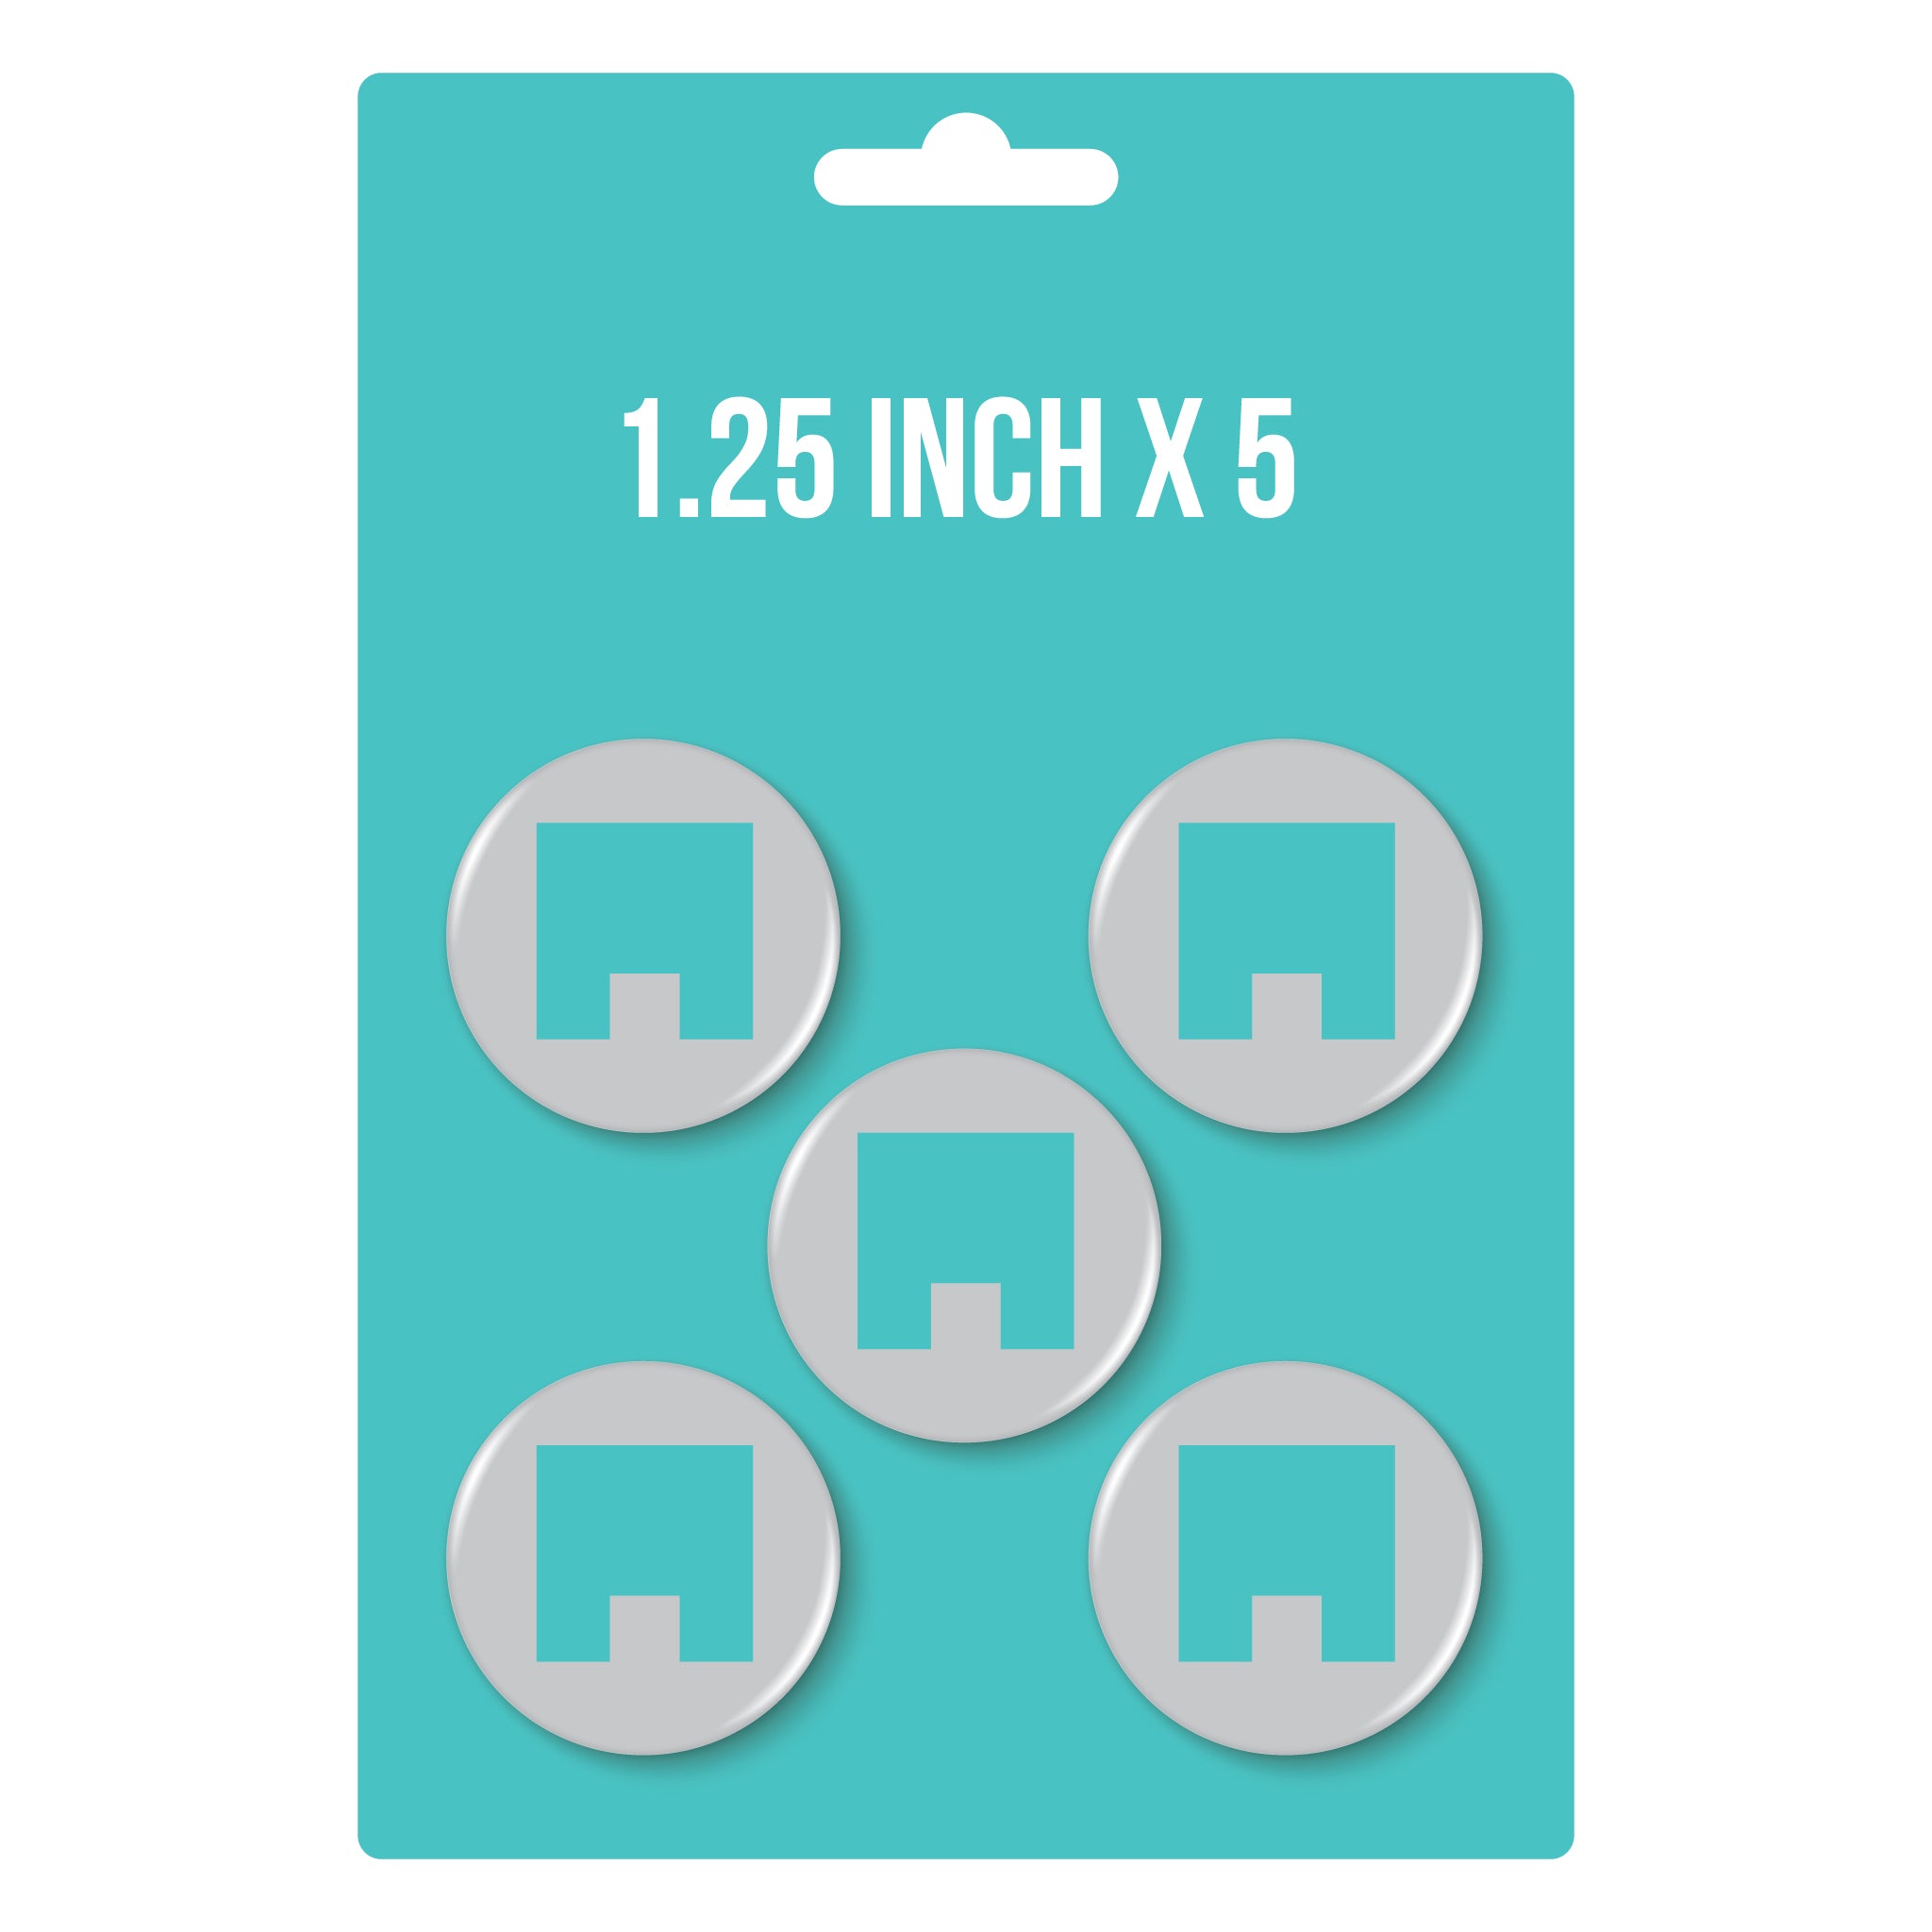 1.25" x 5 Button Pack